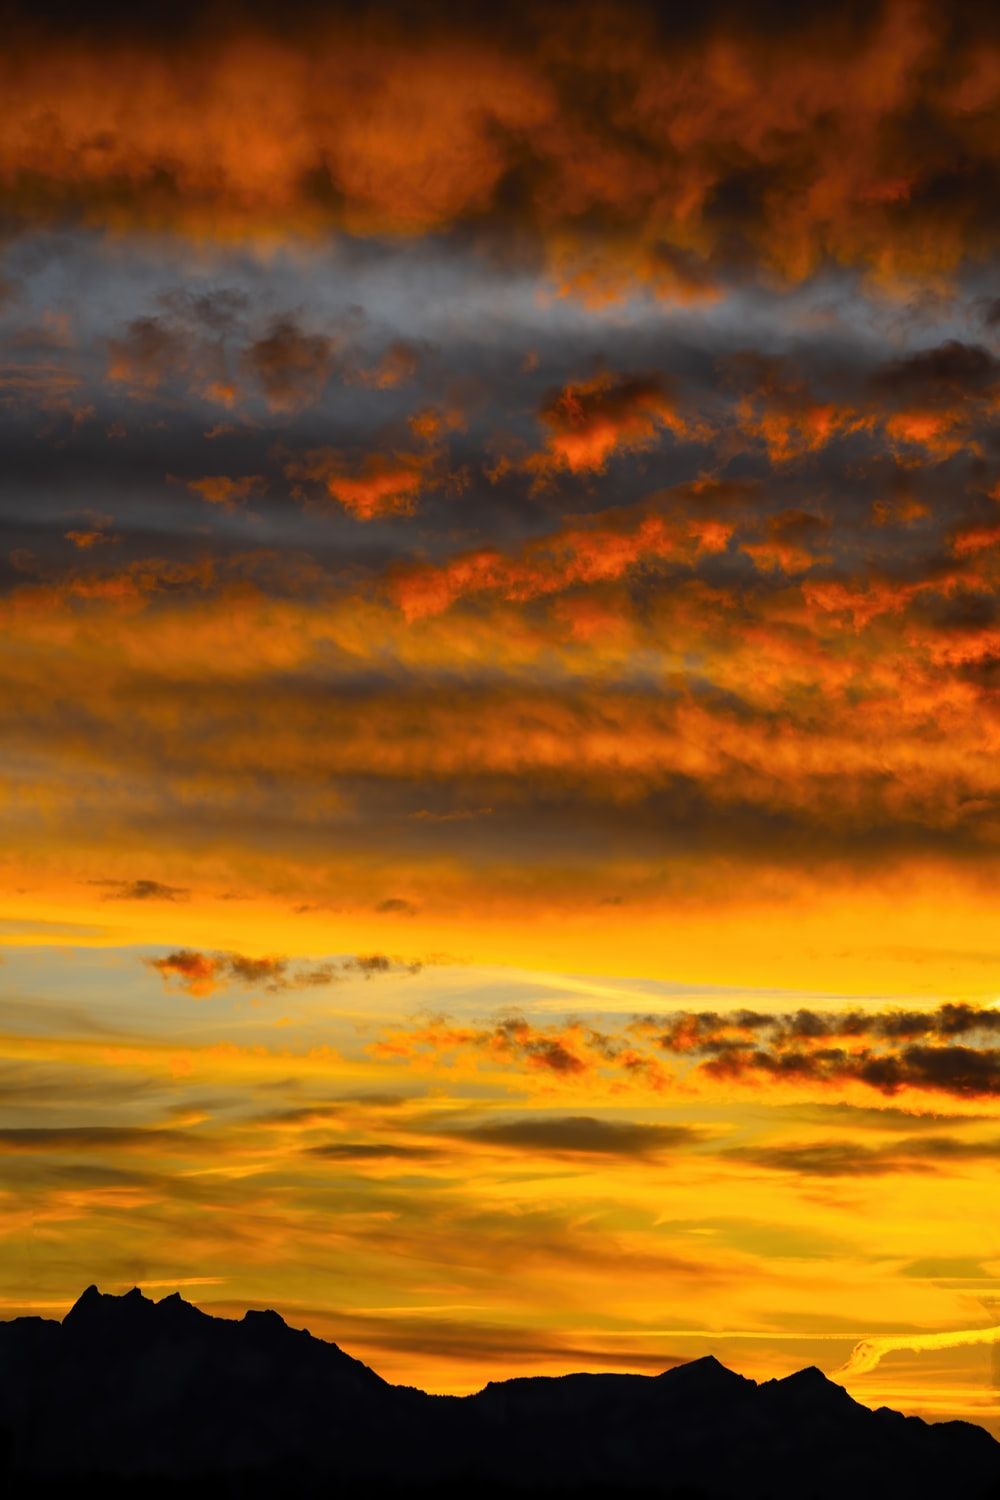 Sunset Cloud Picture [Stunning!]. Download Free Image